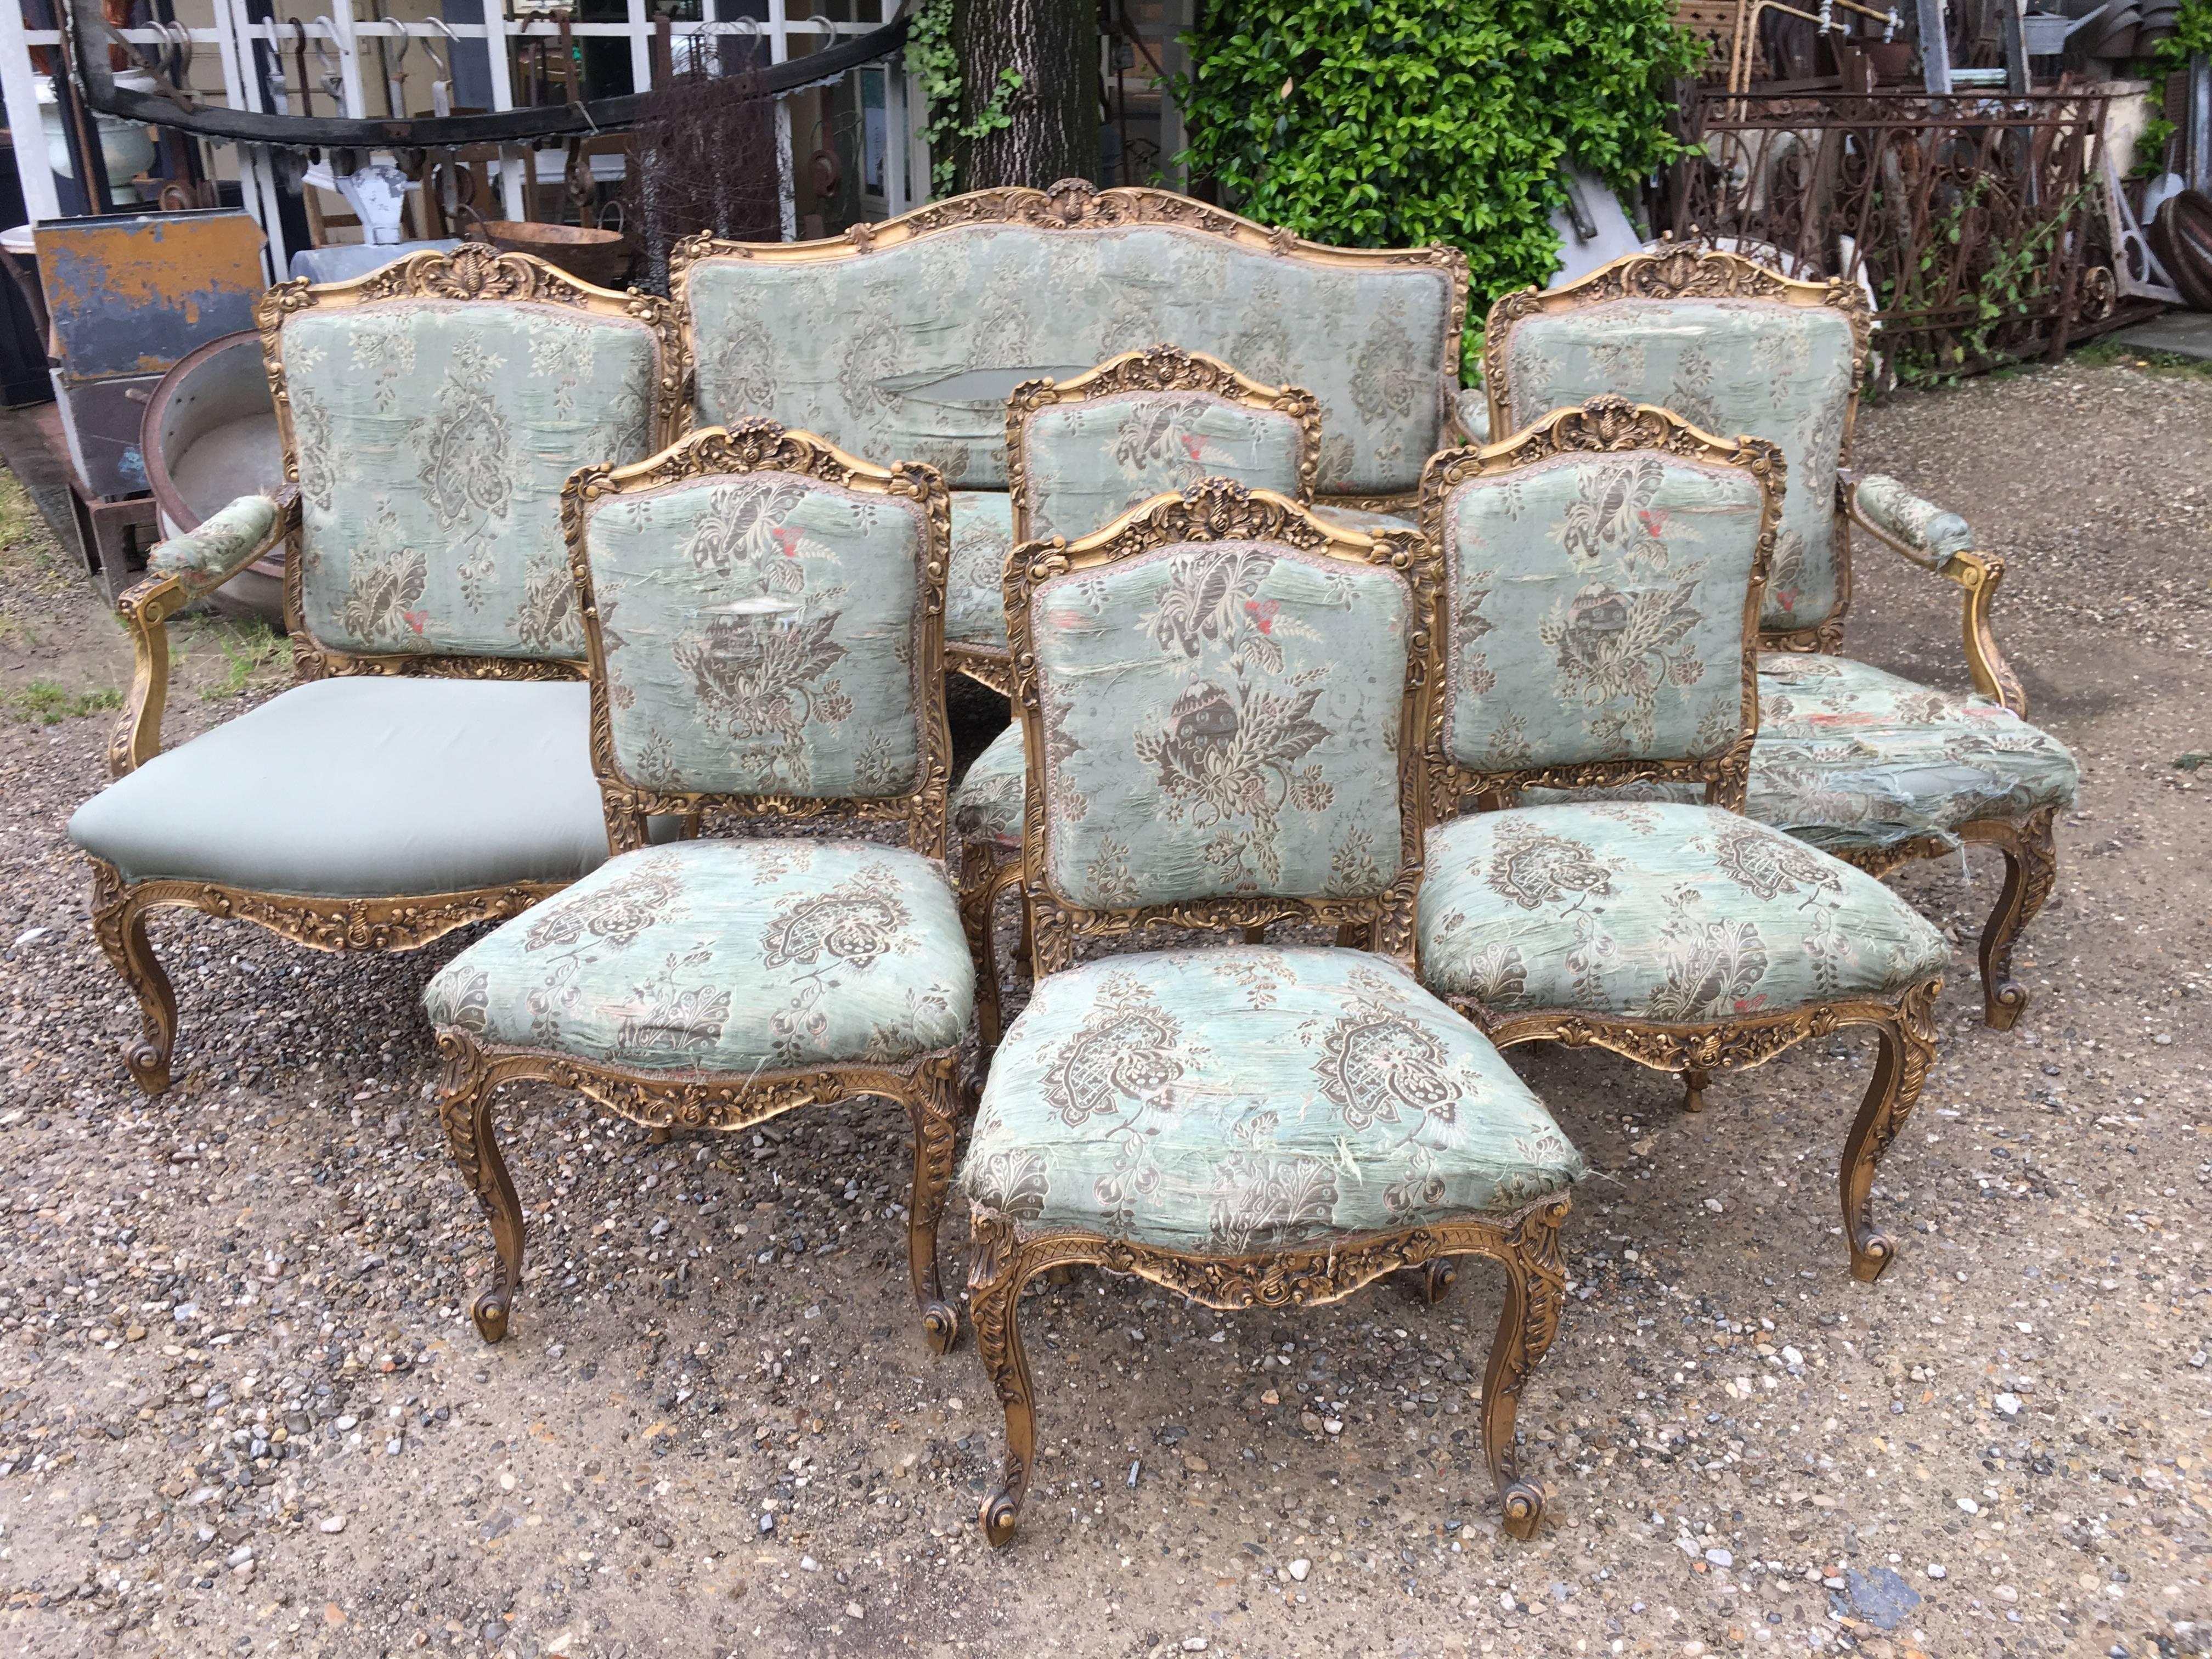 French living room set in gilt carved wood and original brocade fabric from 19h century in the style of Louis XV.
This set is in his original conditions and need to be restaured and reupholstered.
On demand we can provide quotation for